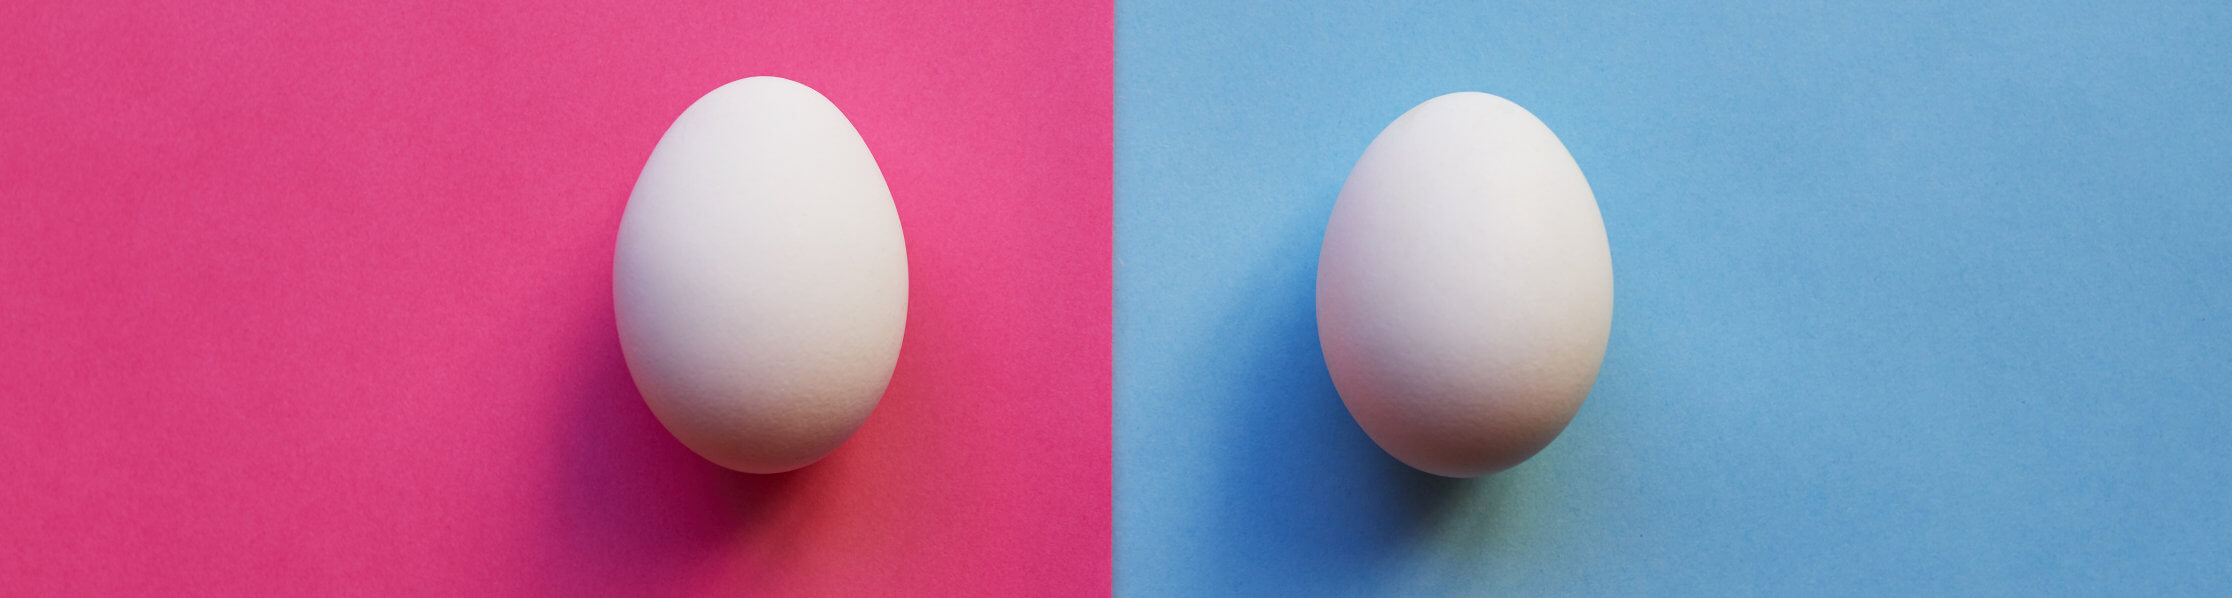 two chicken eggs side by side on different coloured backgrounds